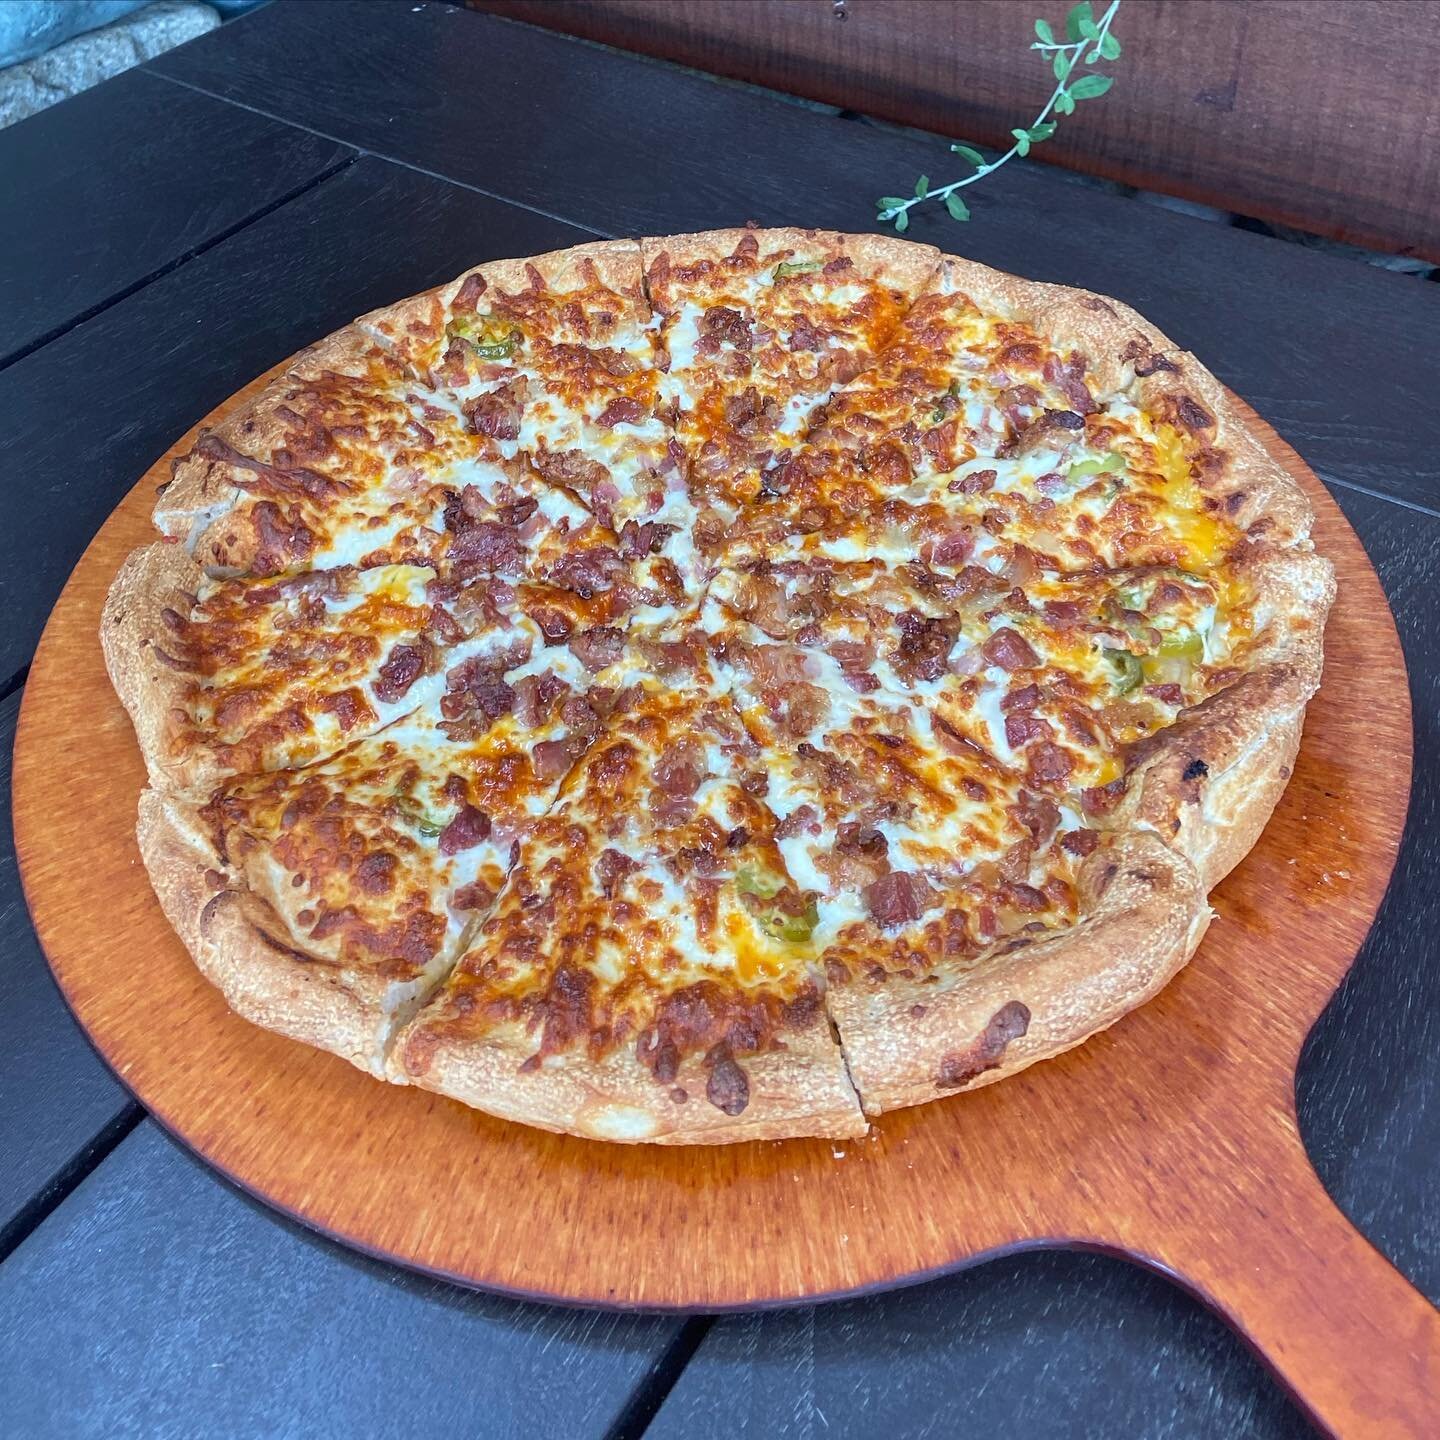 We are bringing the heat for July! 🔥

JALAPE&Ntilde;O POPPER PIZZA
Our artisan dough covered in creamy cheese sauce, topped with jalape&ntilde;os, red onion, bacon, cheddar cheese and our Edam mozzarella blend. 

#mychosenpizza #mychosencafe #yyjpiz